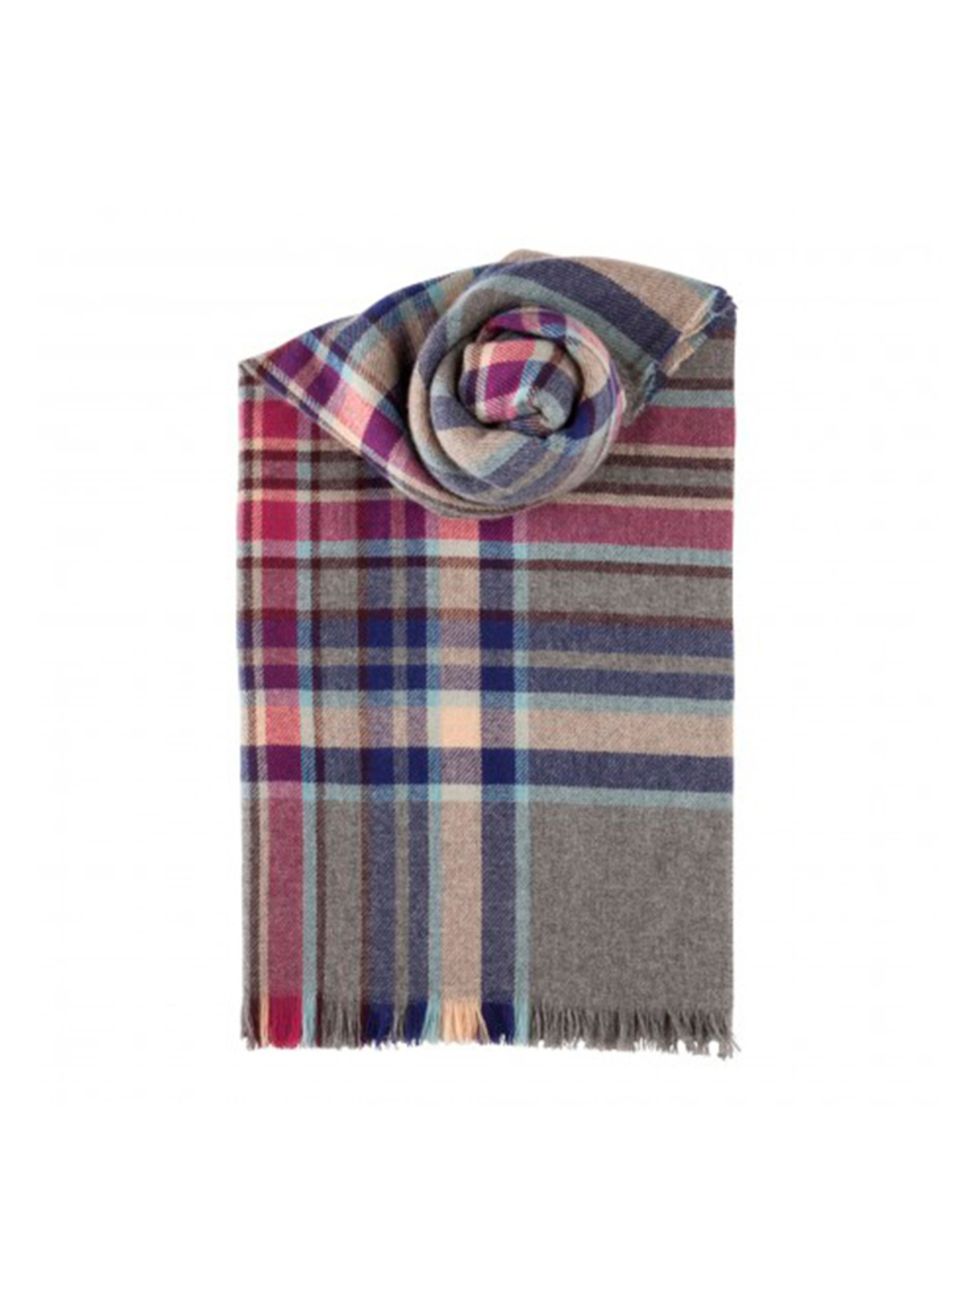 <p><a href="http://www.johnstonscashmere.com/retail/accessories/scarves-stoles/cashmere-lightweight-oversized-check-stole.html" target="_blank">Johnstons of Elgin cashmere scarf</a>, £145</p>